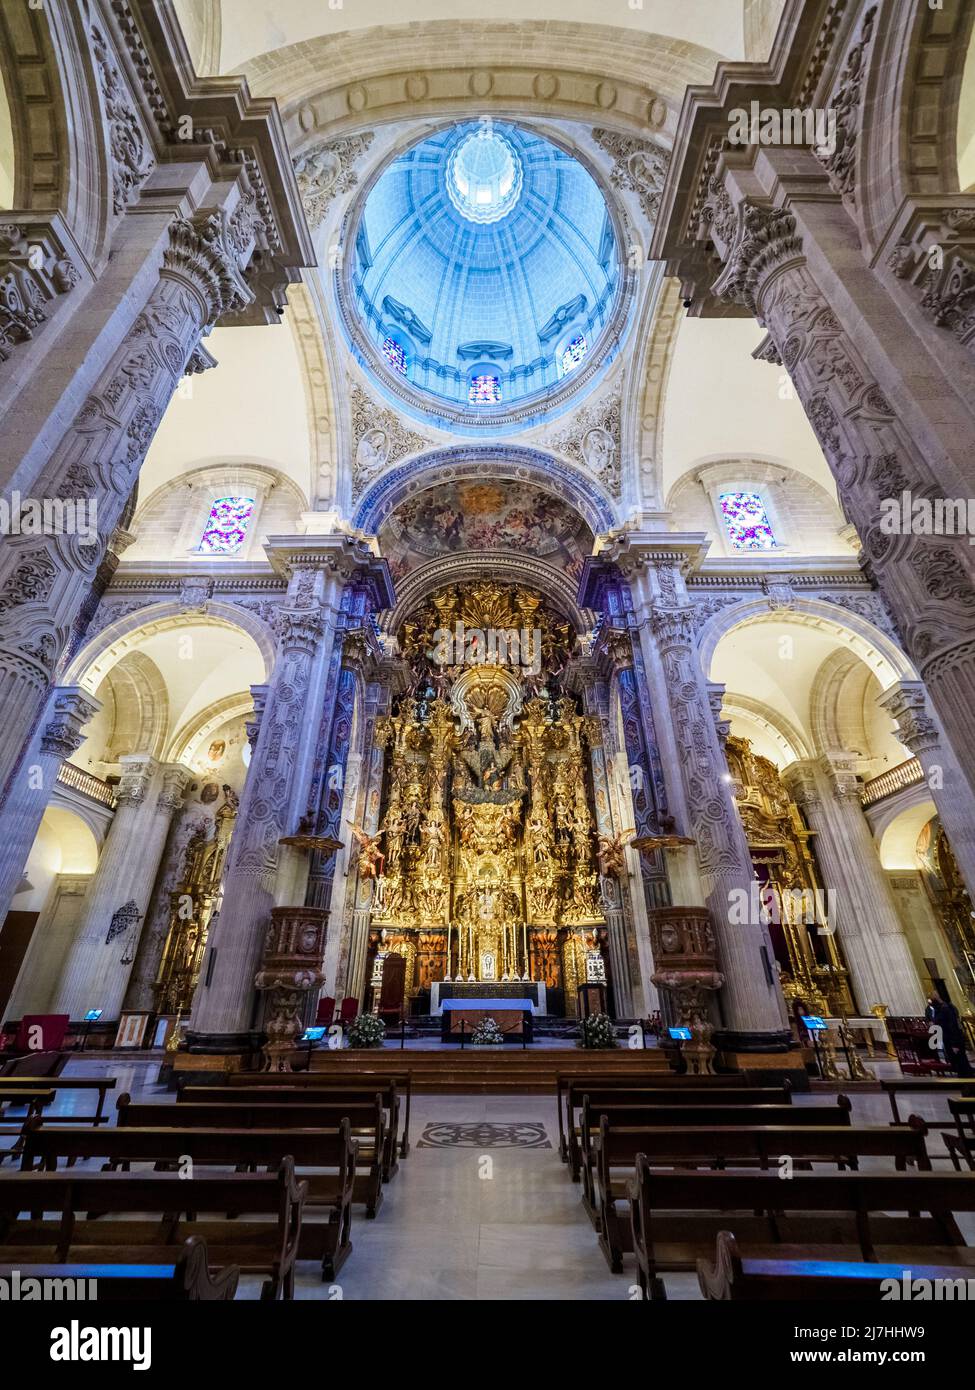 Central nave and the main altarpiece of the Collegiate Church of the Divine Savior - Seville, Spain Stock Photo